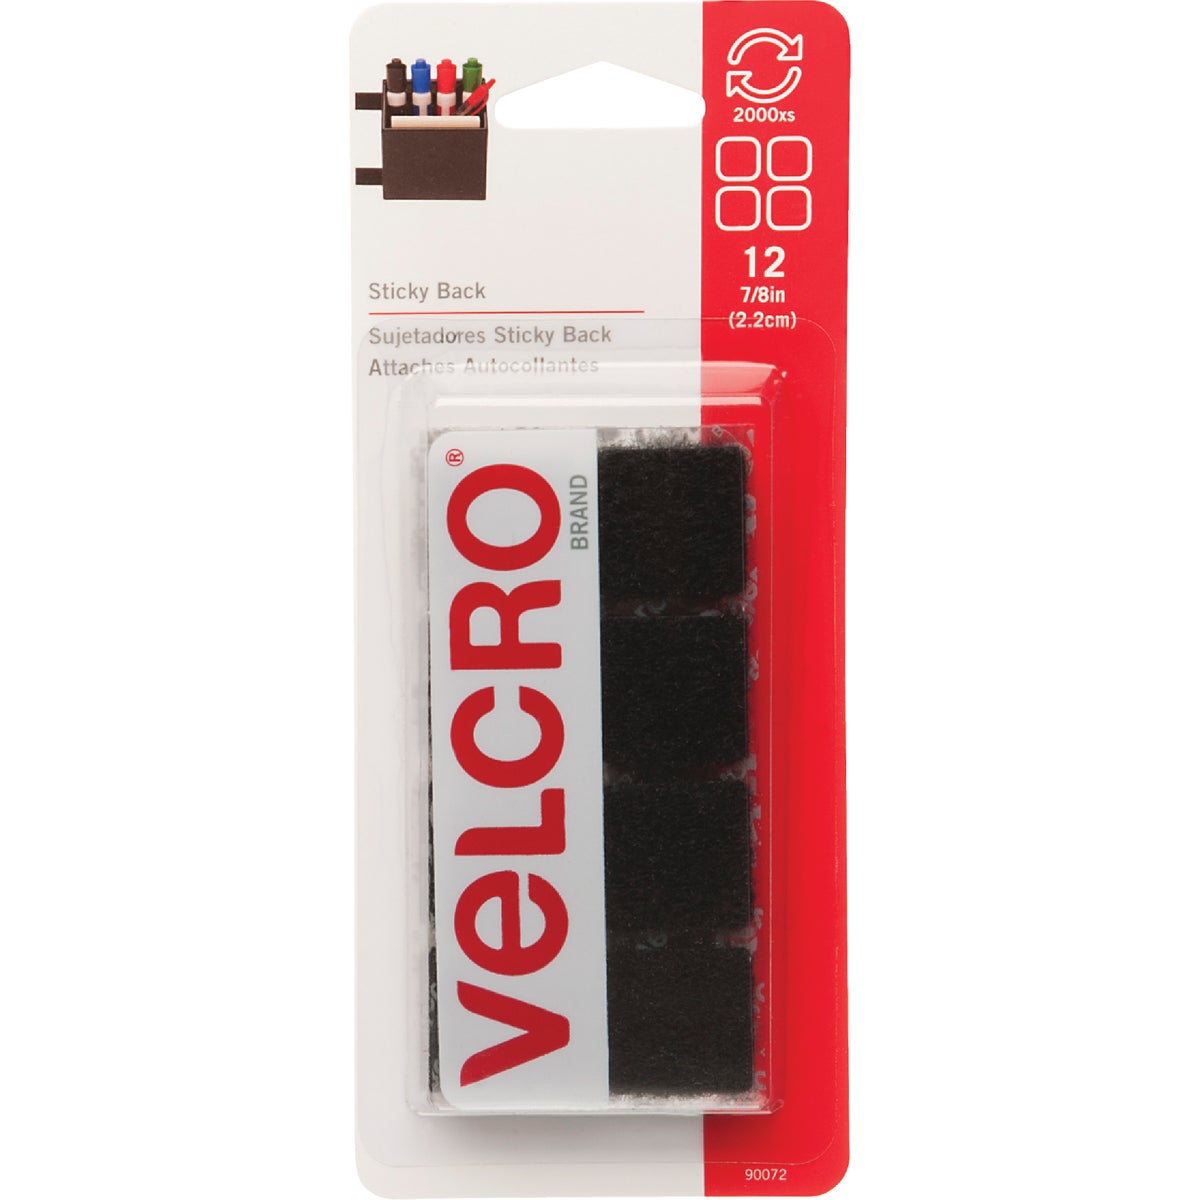 Item 623385, 7/8 In. adhesive backing VELCRO brand squares.